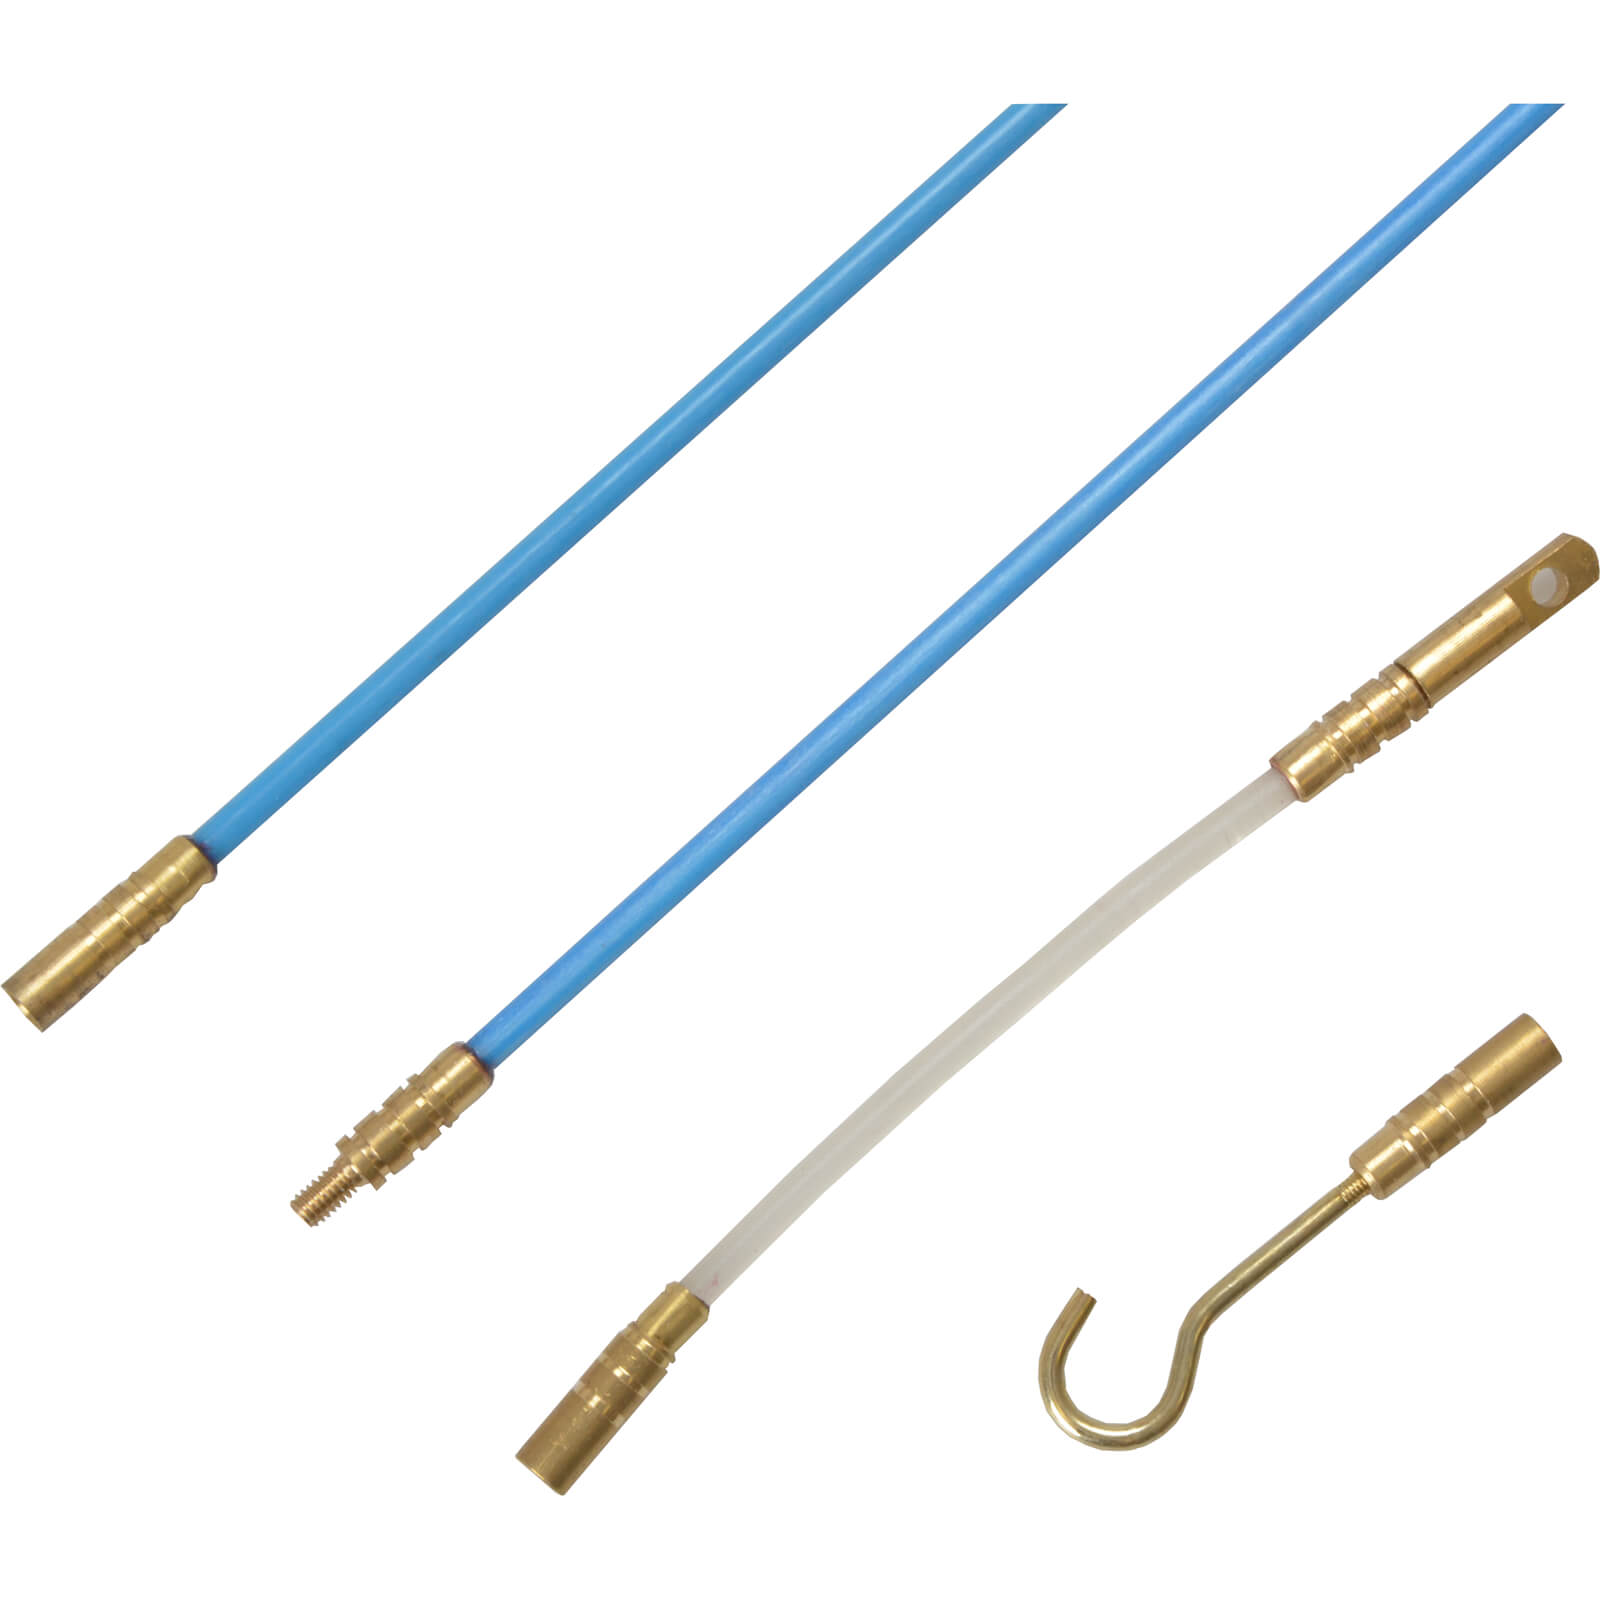 Photo of Bluespot 10 Piece Cable Rod And Accessory Kit